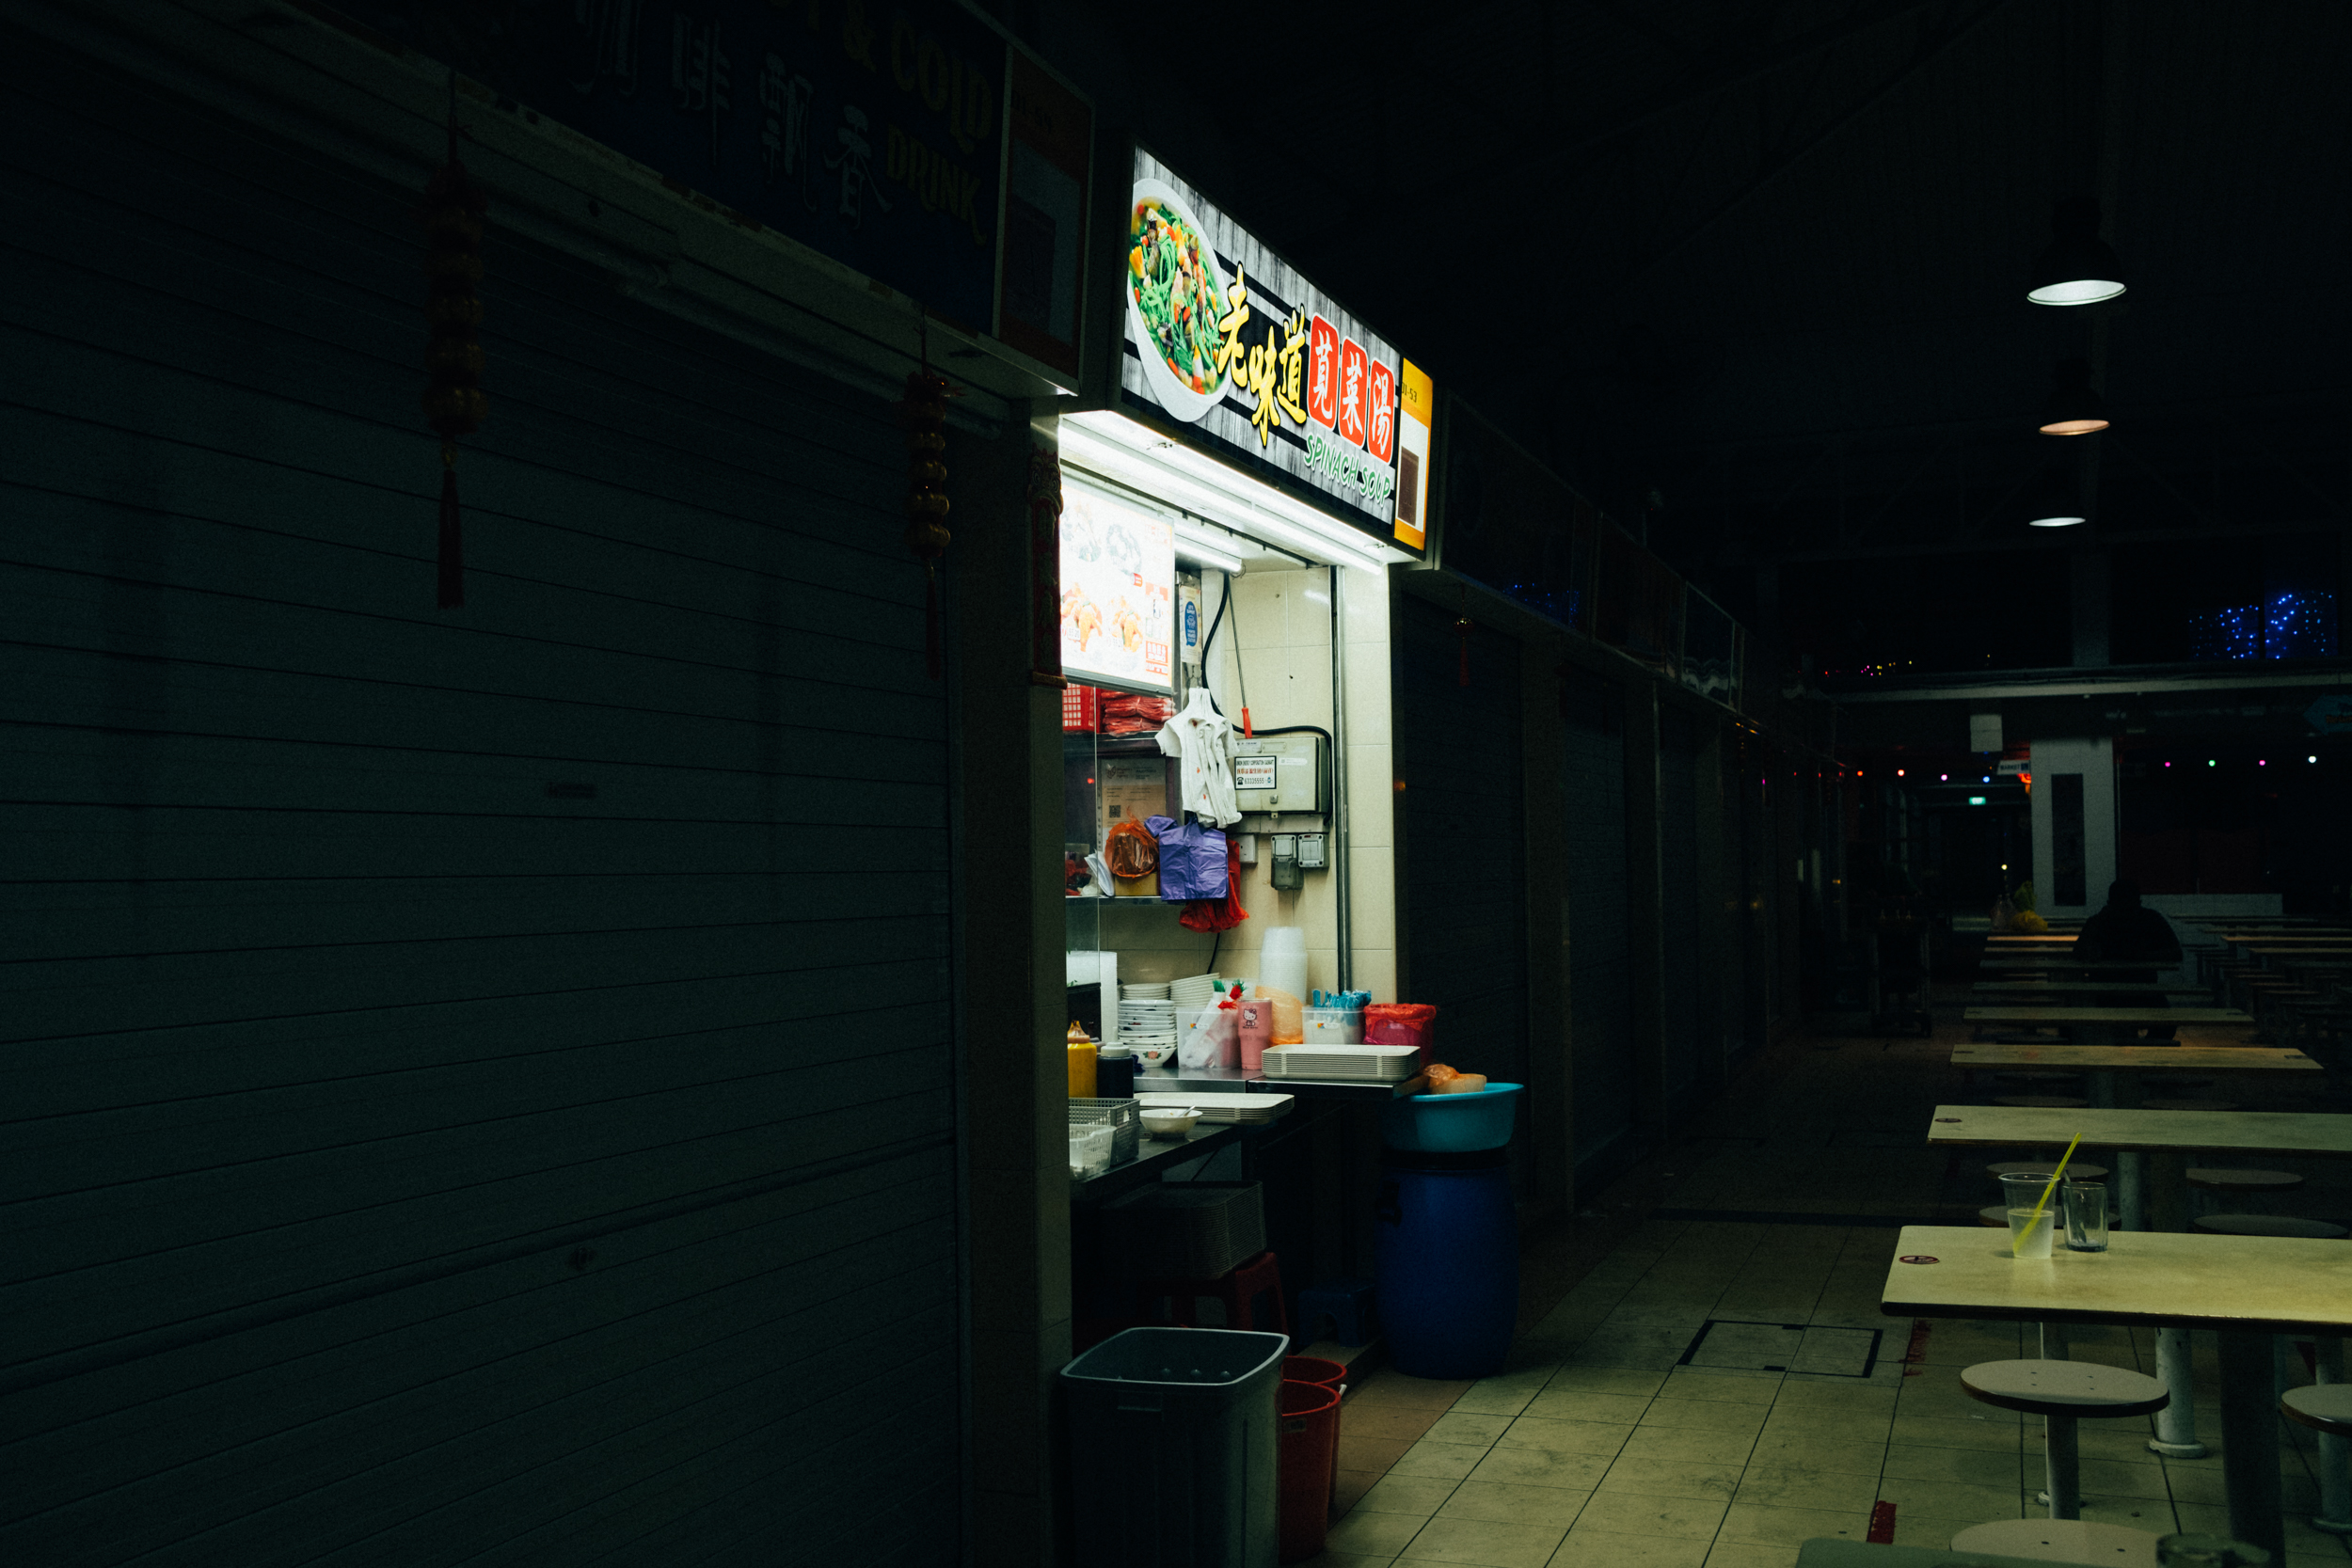 Image of a hawker stall